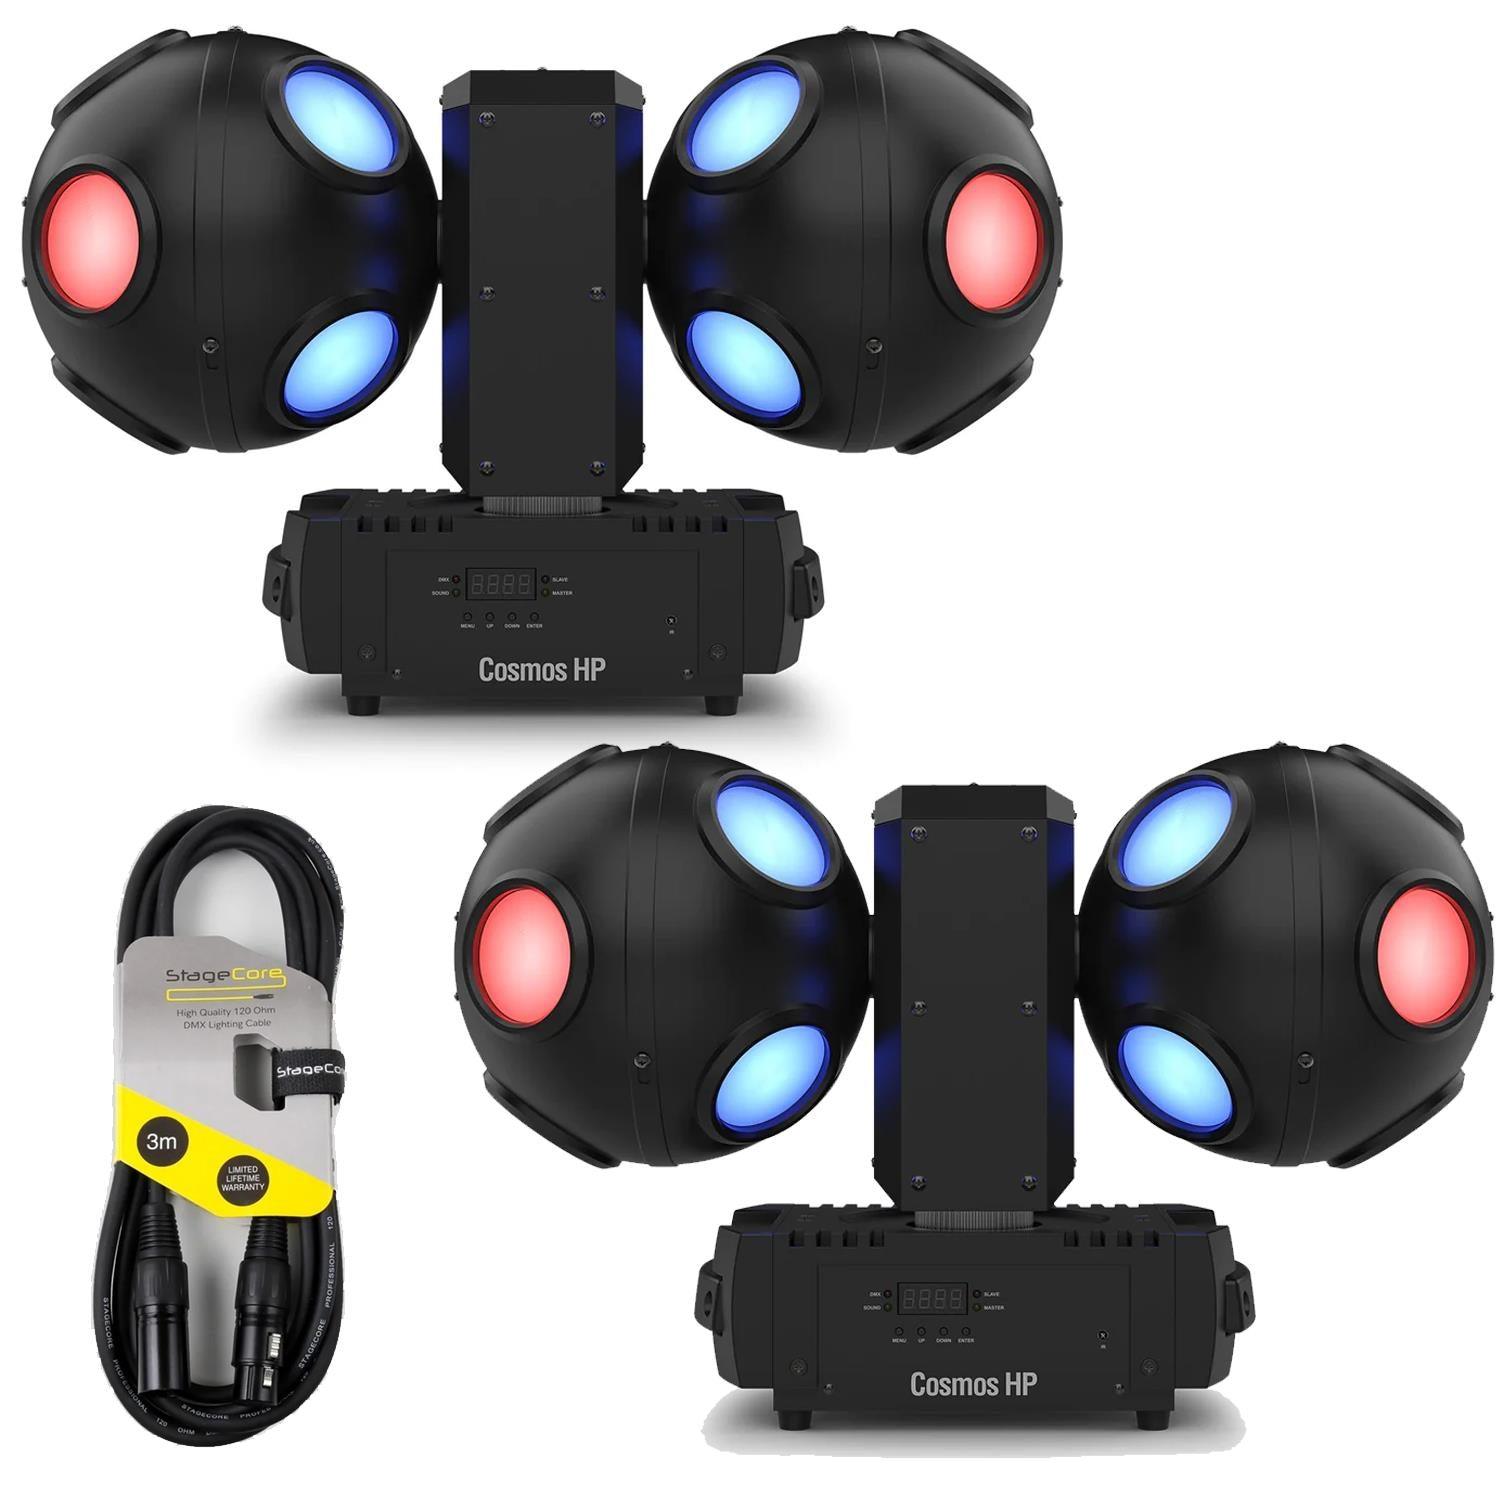 2 x Chauvet DJ Cosmos HP RGBW Rotating Effect Light with DMX Cable - DY Pro Audio